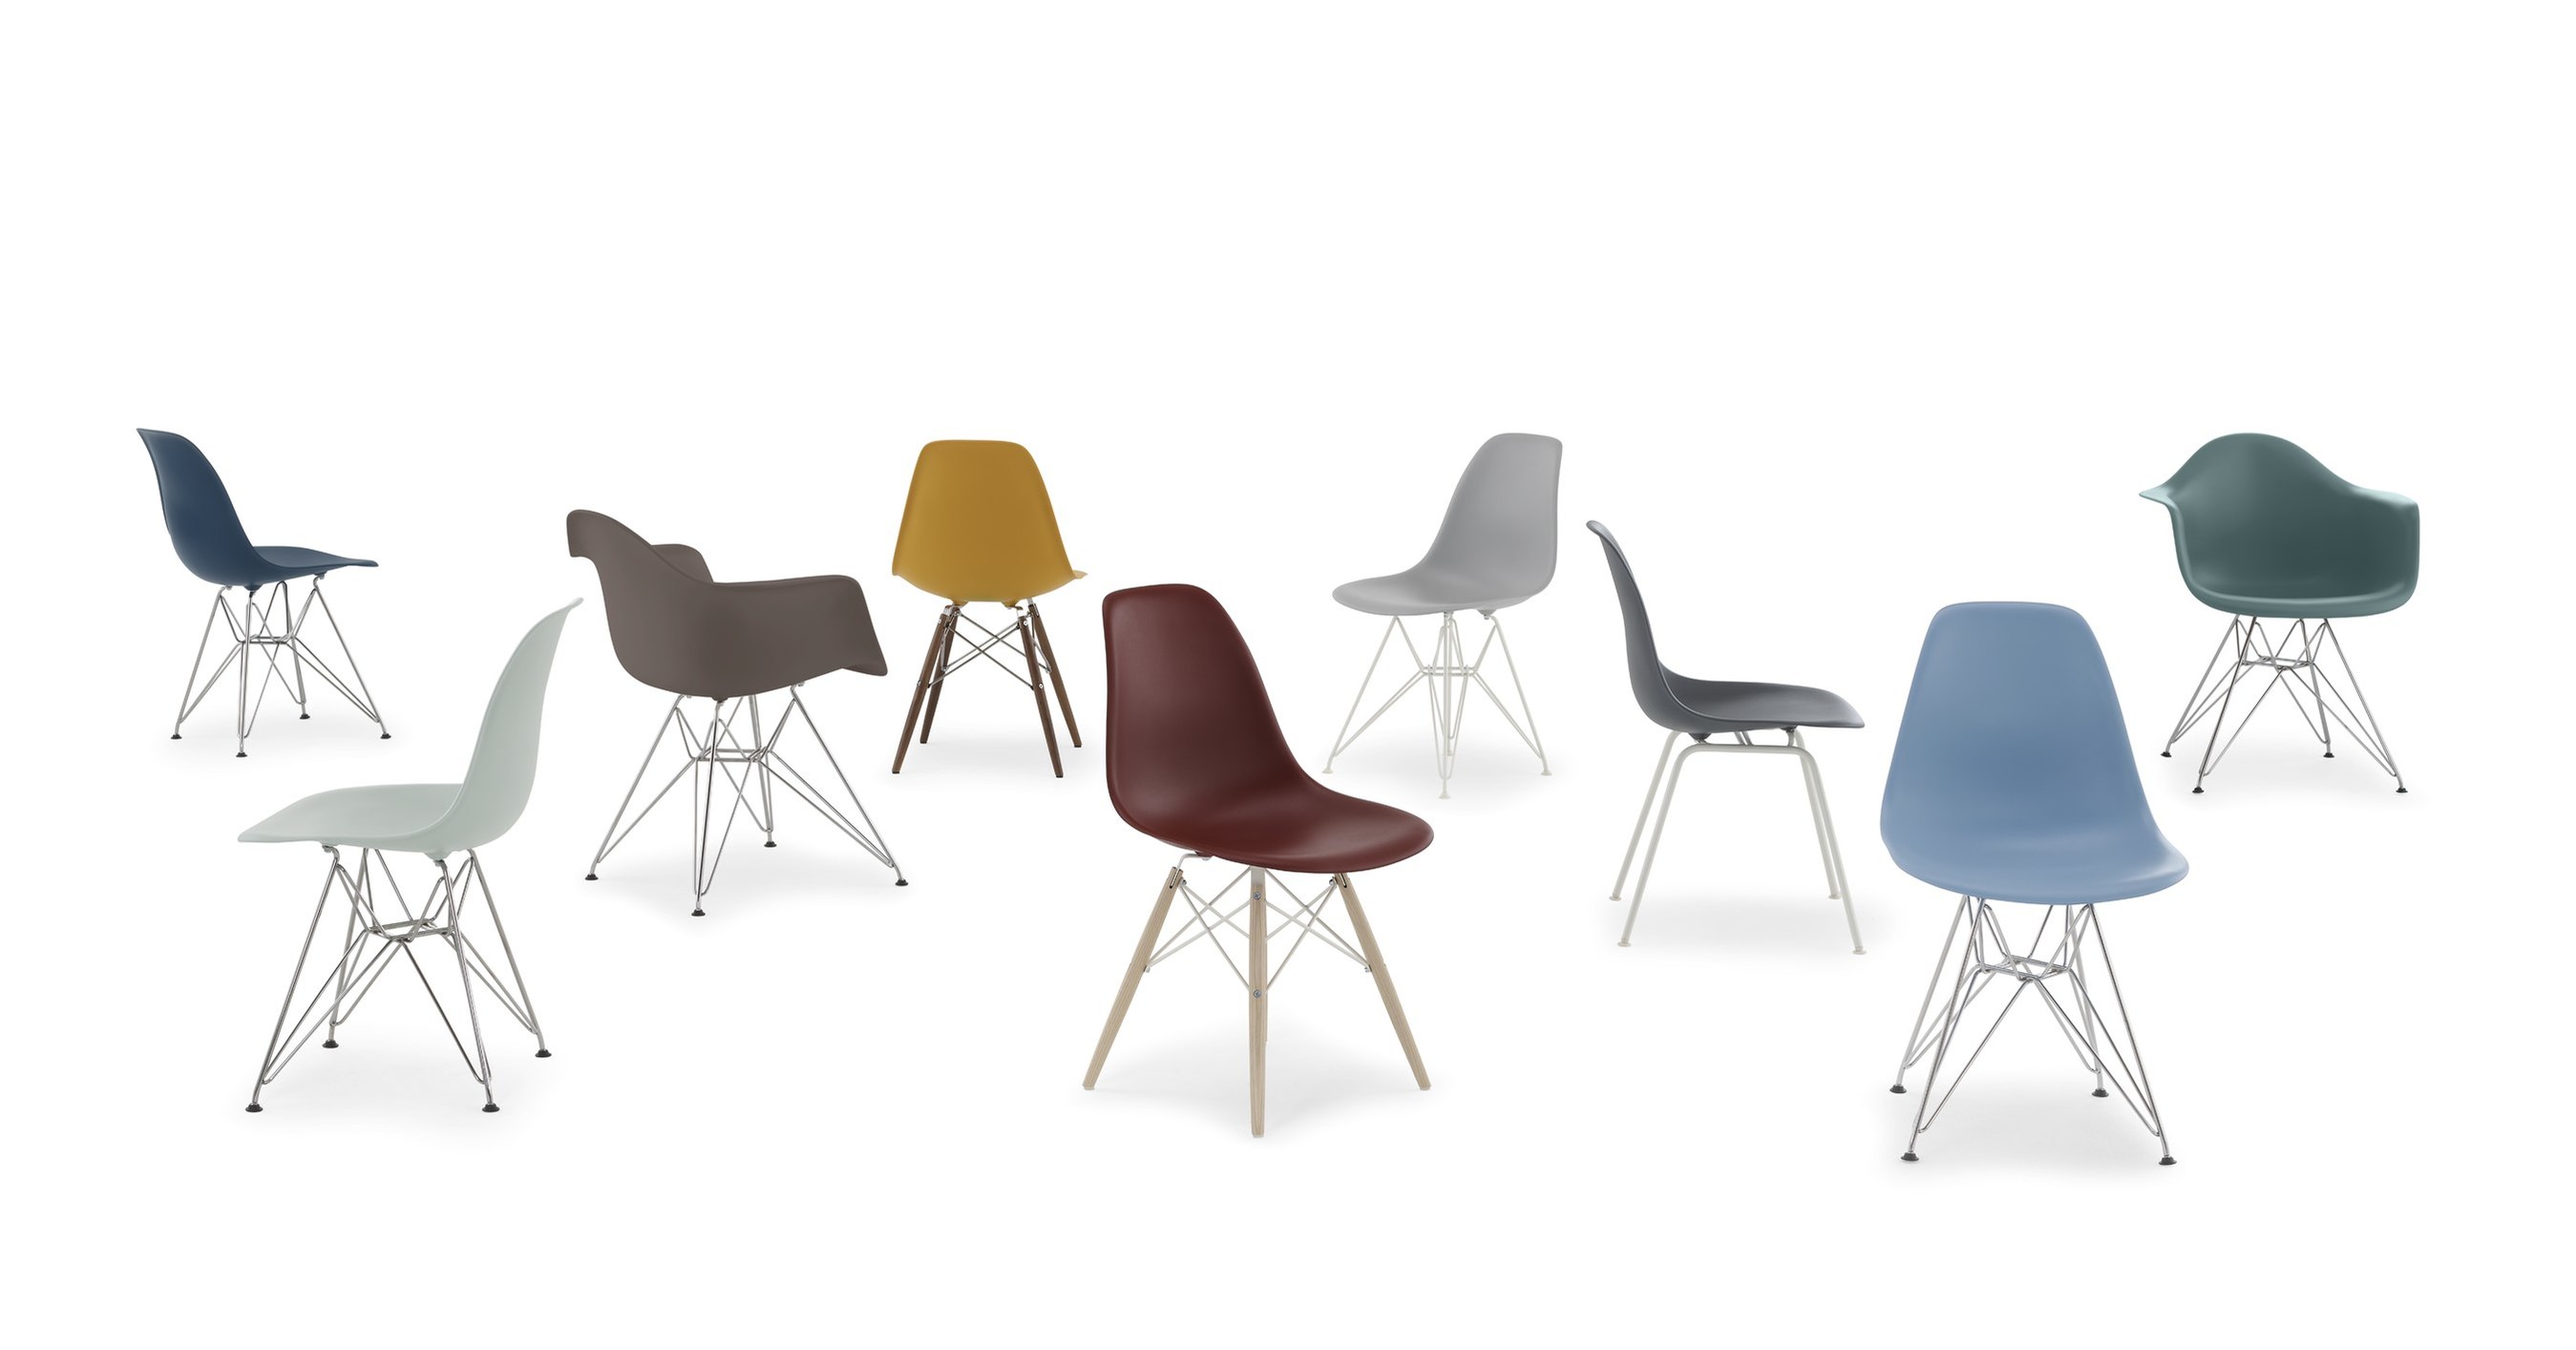 Eames Molded Plastic Chair Dining Room